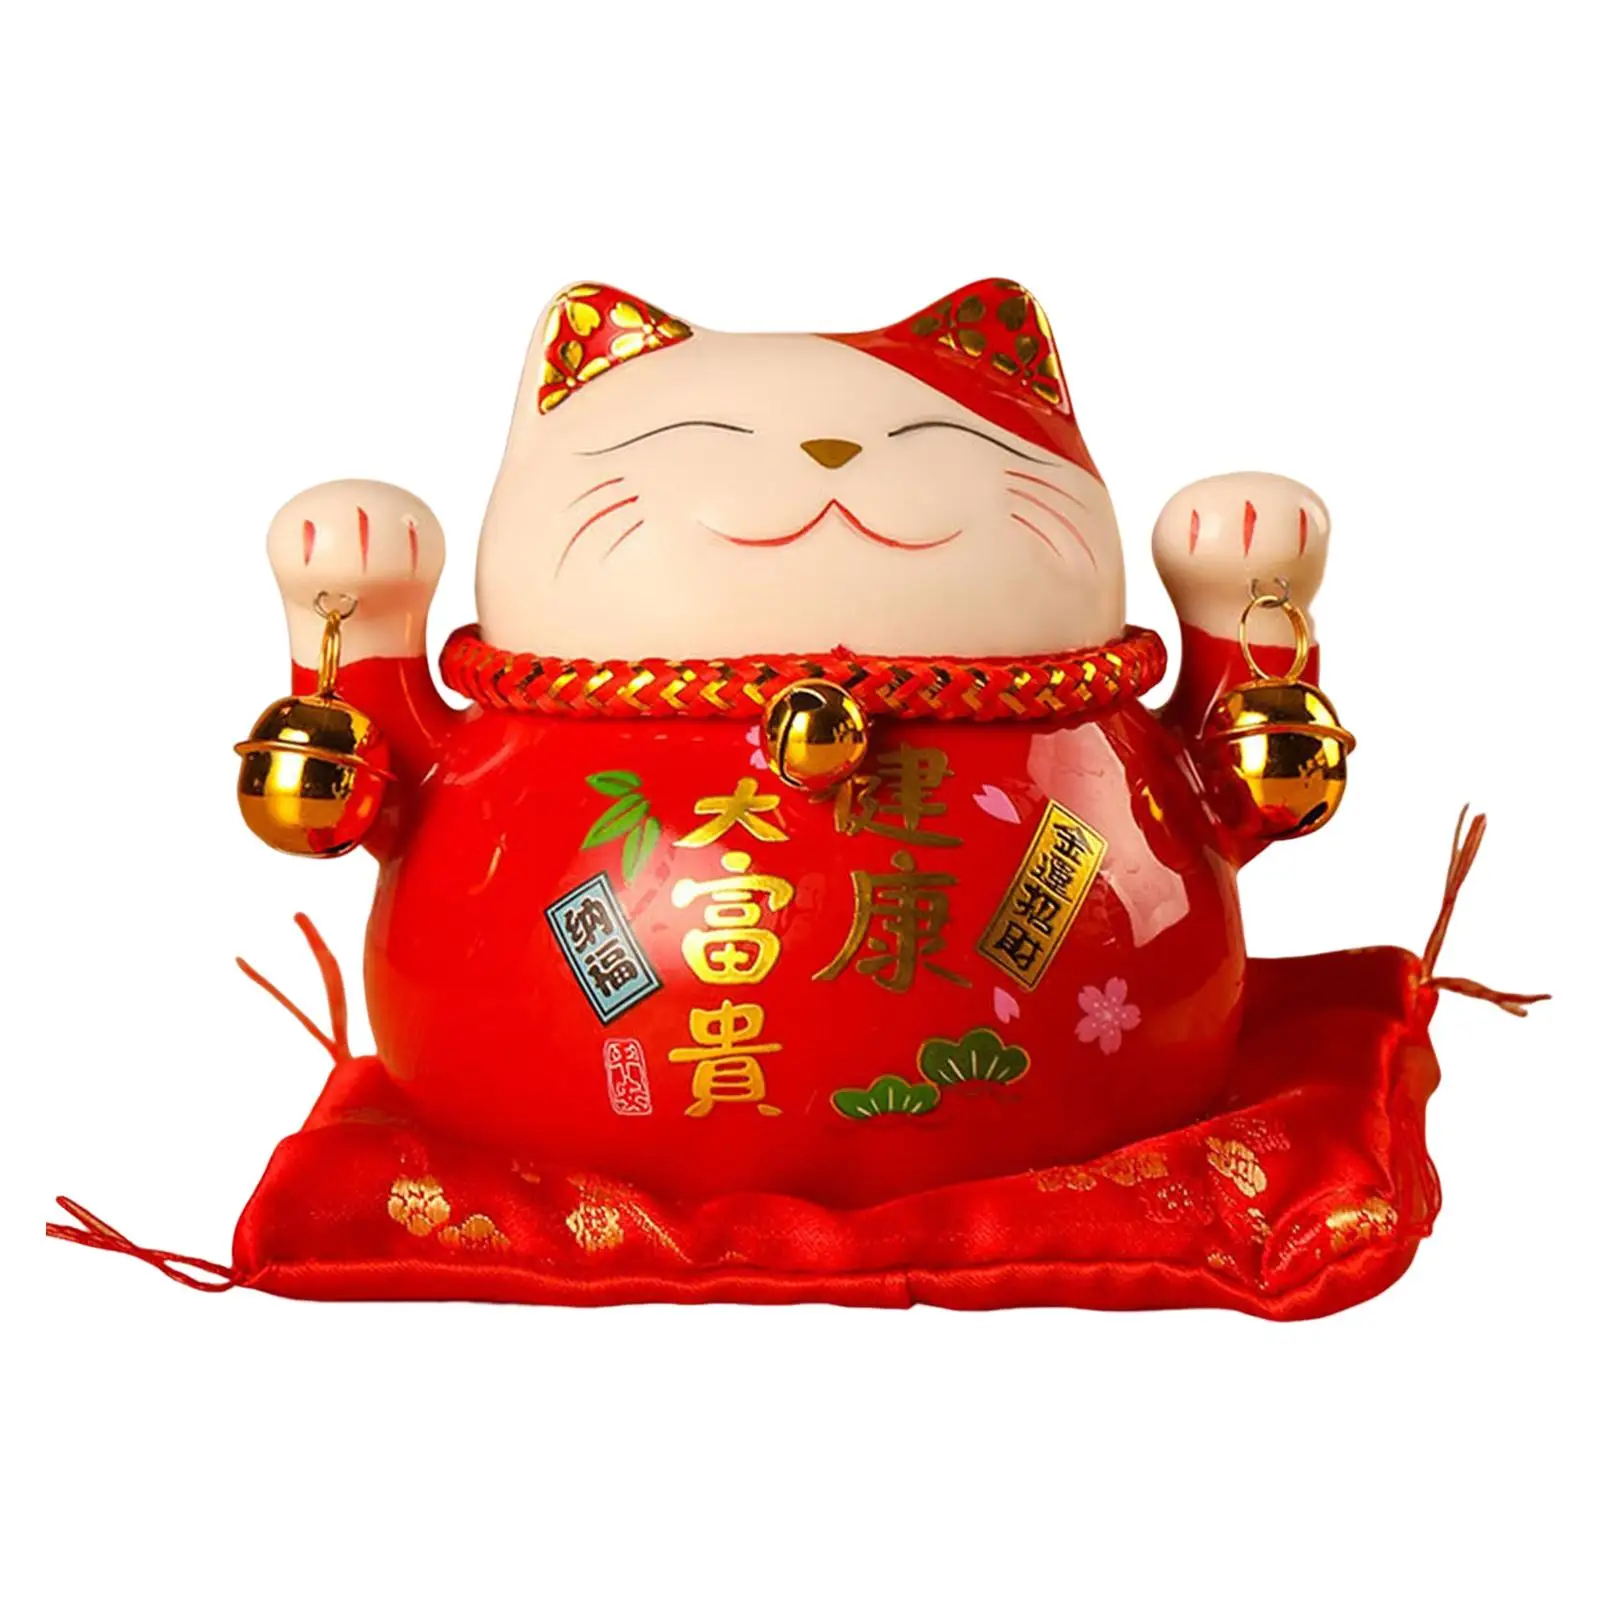 Feng Shui Lucky Cat Money Bank Statues with Bell Crafts Decoration Home Decor Display Ceramic for Desktop Gift Presents Office